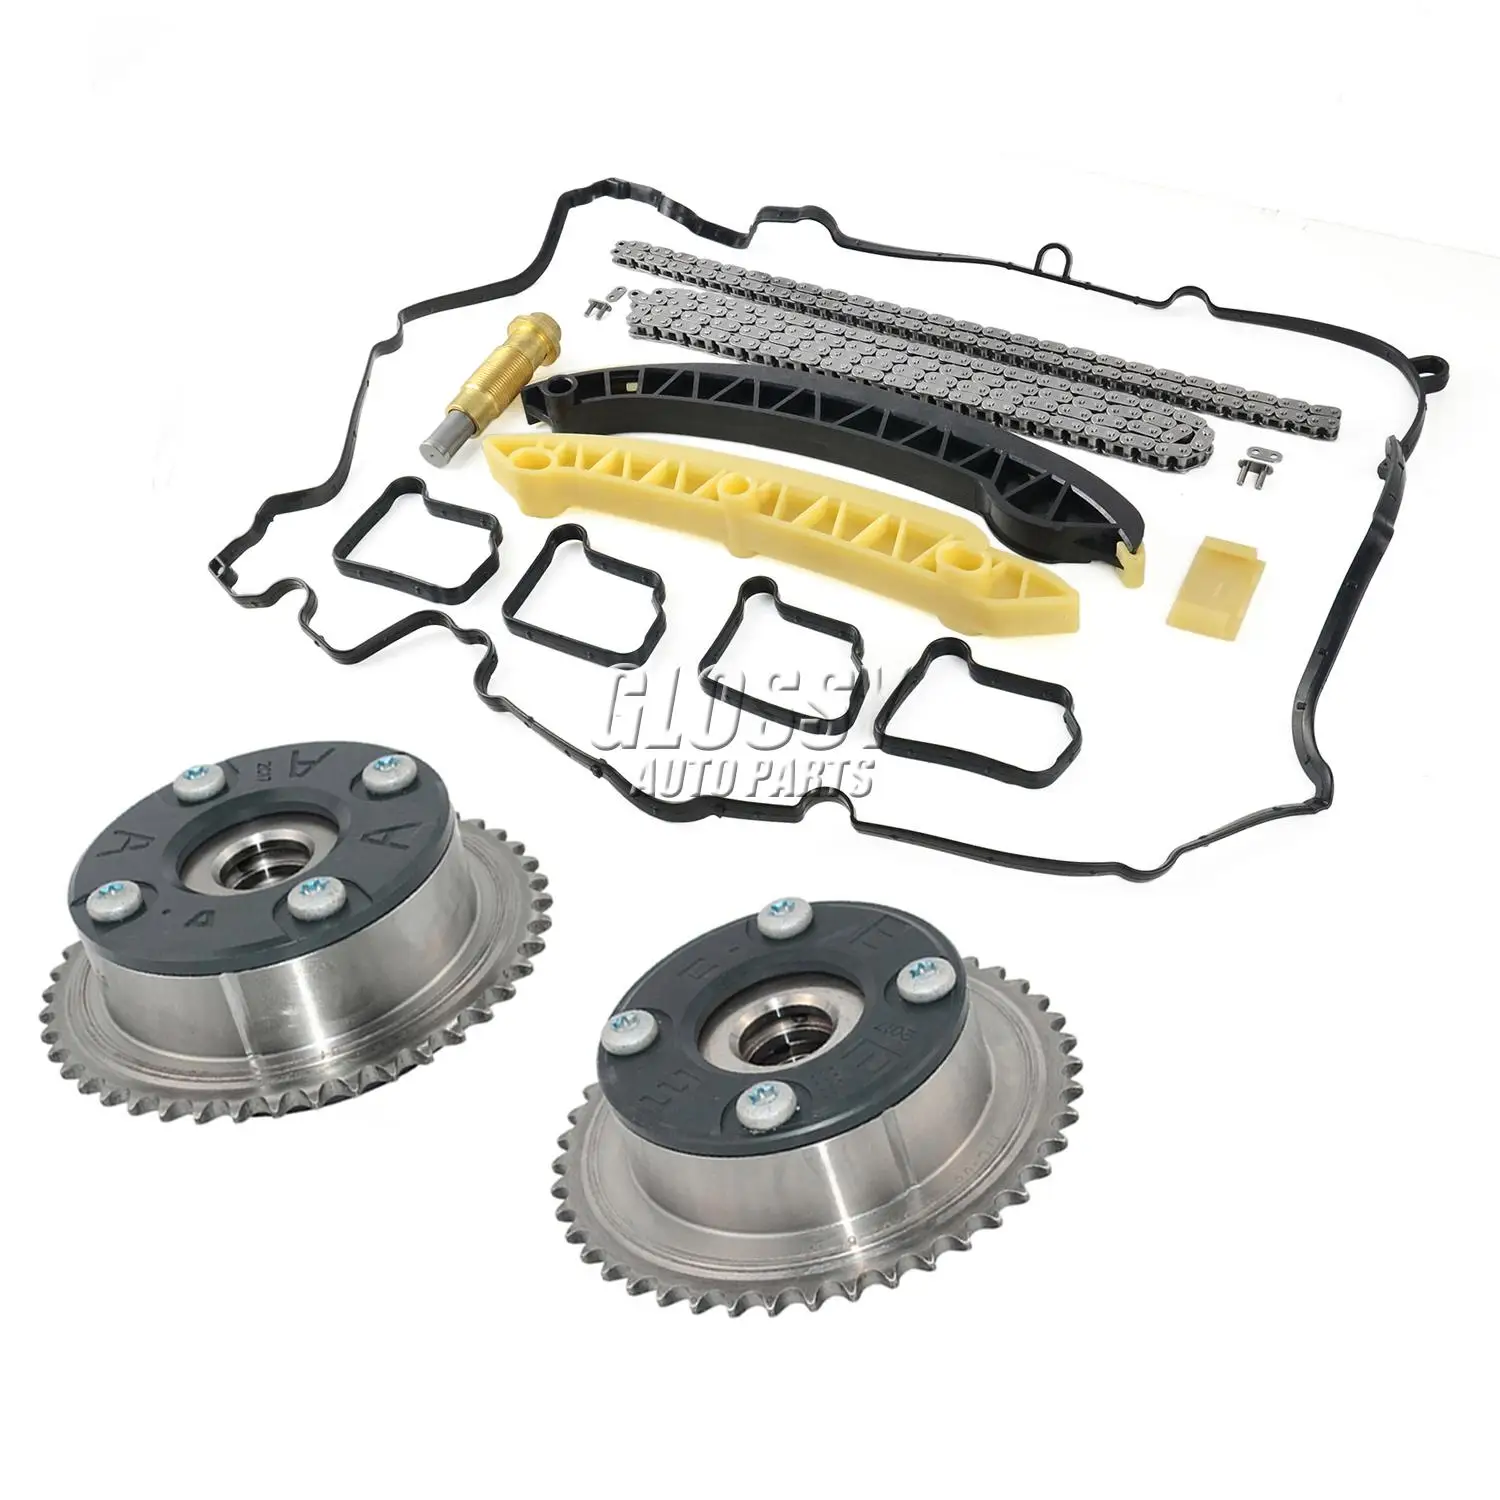 

AP02 For Mercedes W211 W203 W204 M271 timing chain set & camshaft adjuster 2710500800,271 050 08 00,2710500900,271 050 09 00